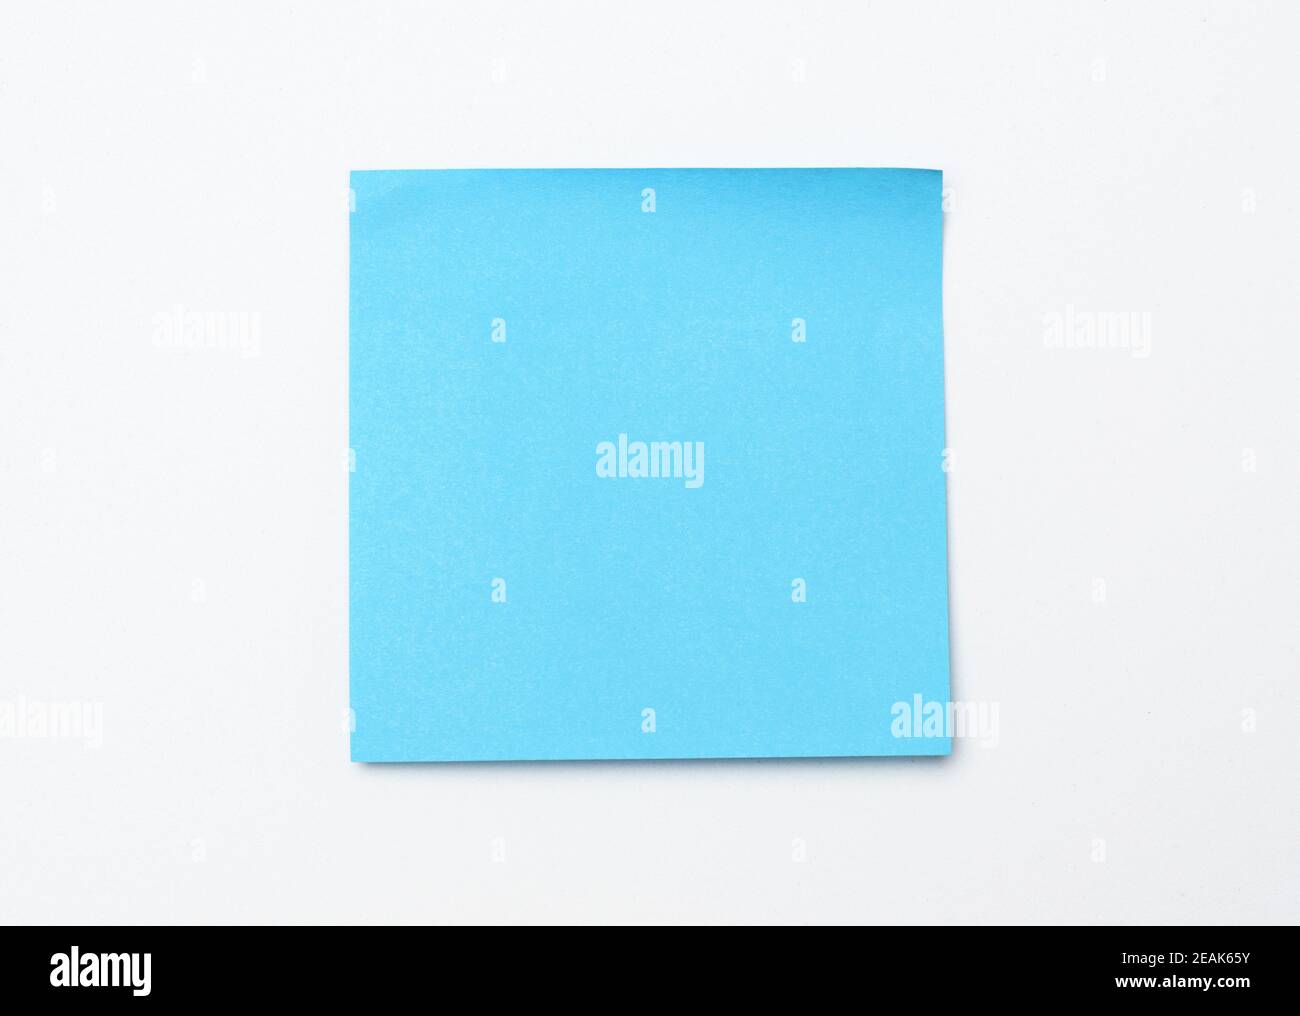 blue square sticker on white surface Stock Photo